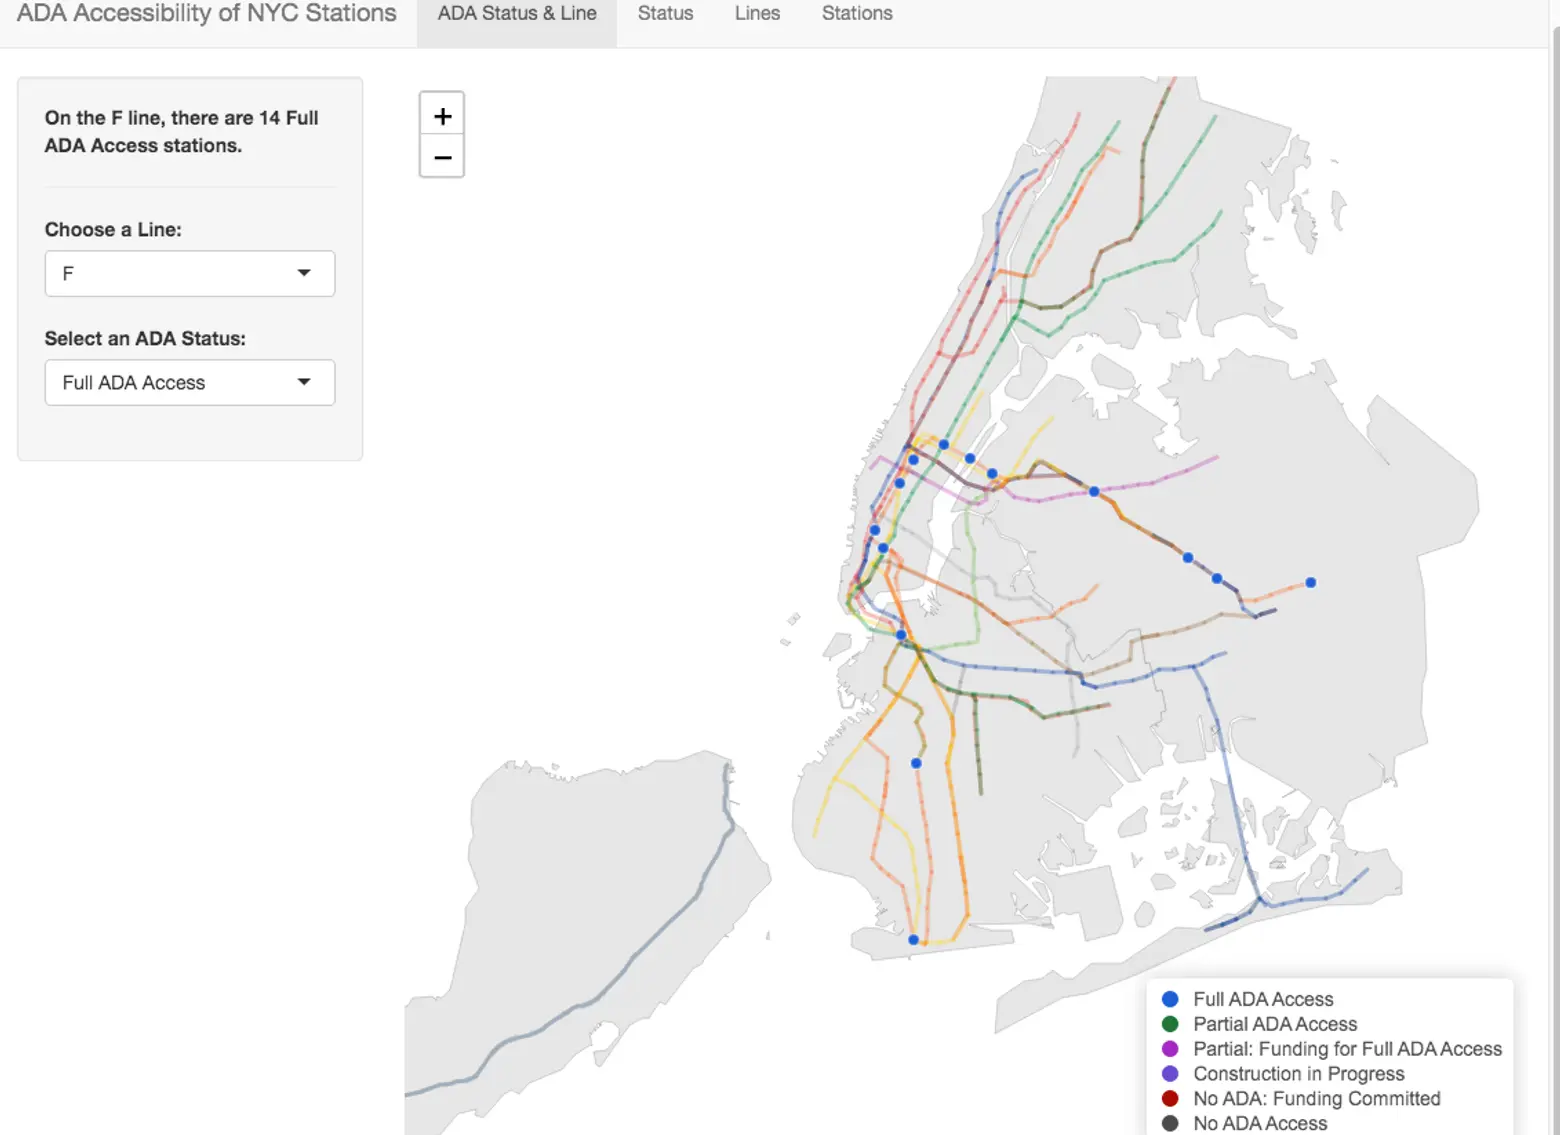 zoning, ACCESSIBILITY, MTA, NYC SUBWAY, city council, maps